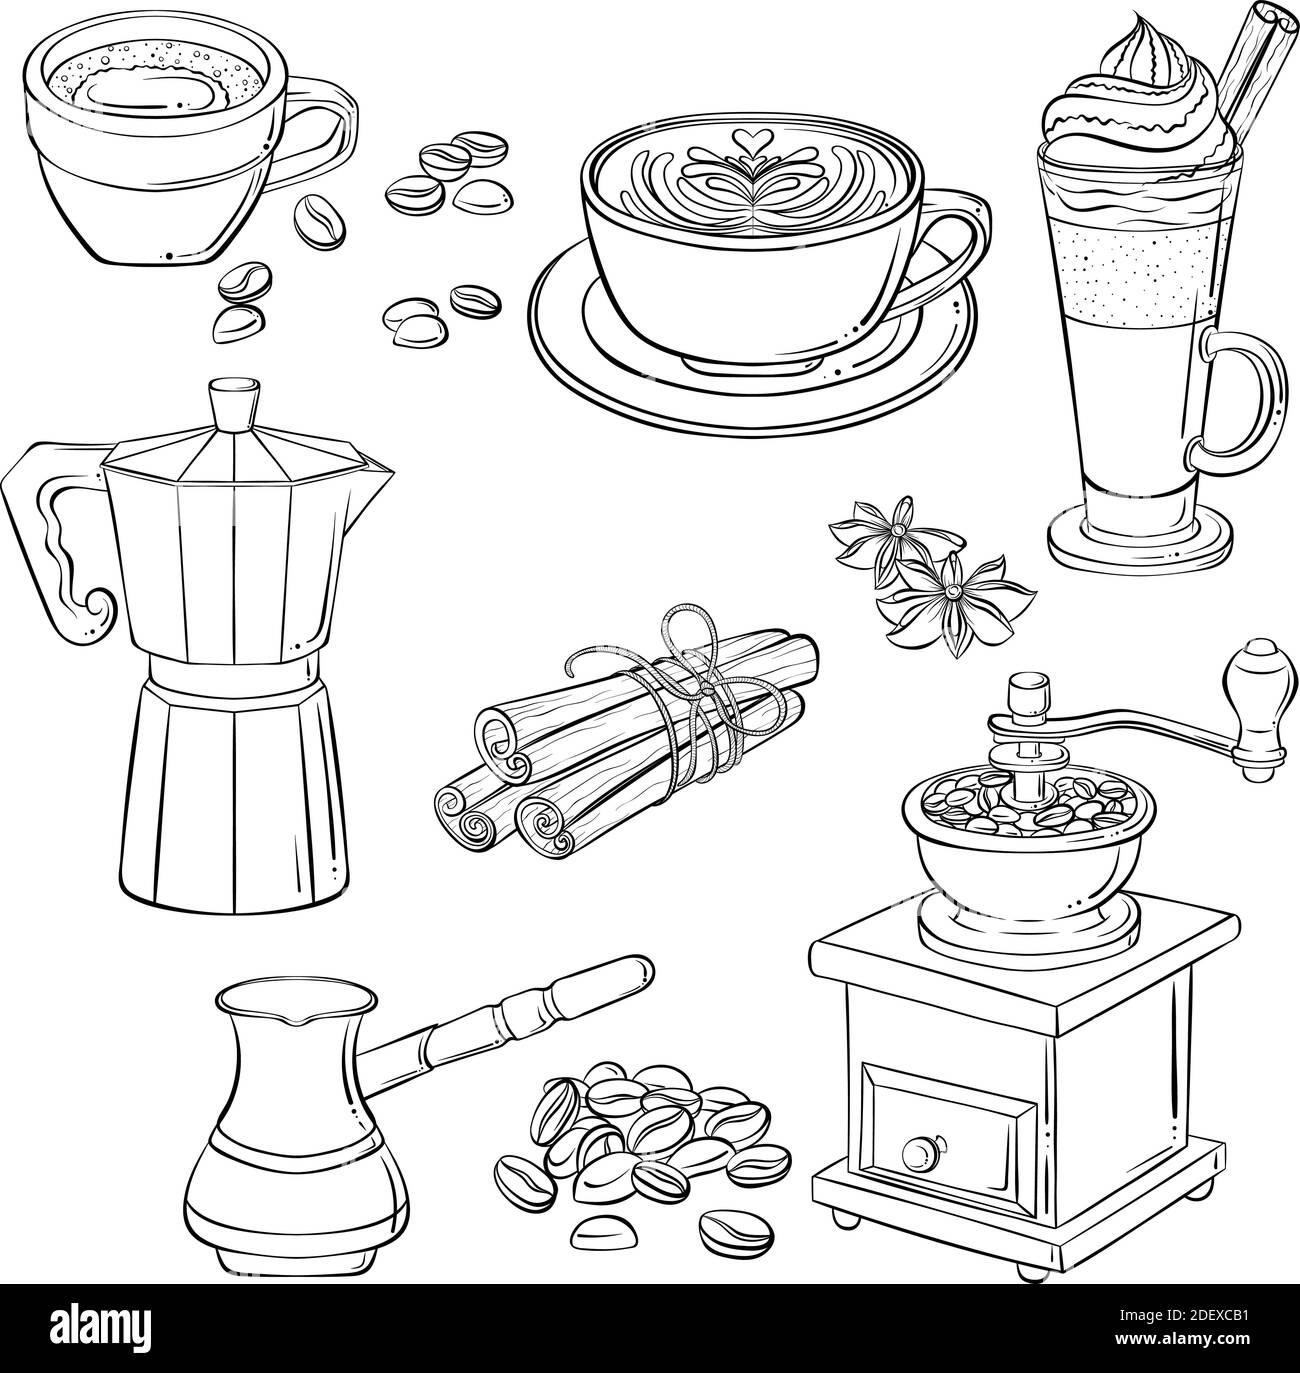 Set with various coffee drinks and coffee makers. Hand drawn vector illustration with black outline isolated on white background. Espresso, cappuccino. Elements for cafe menu, coloring book, print. Stock Vector